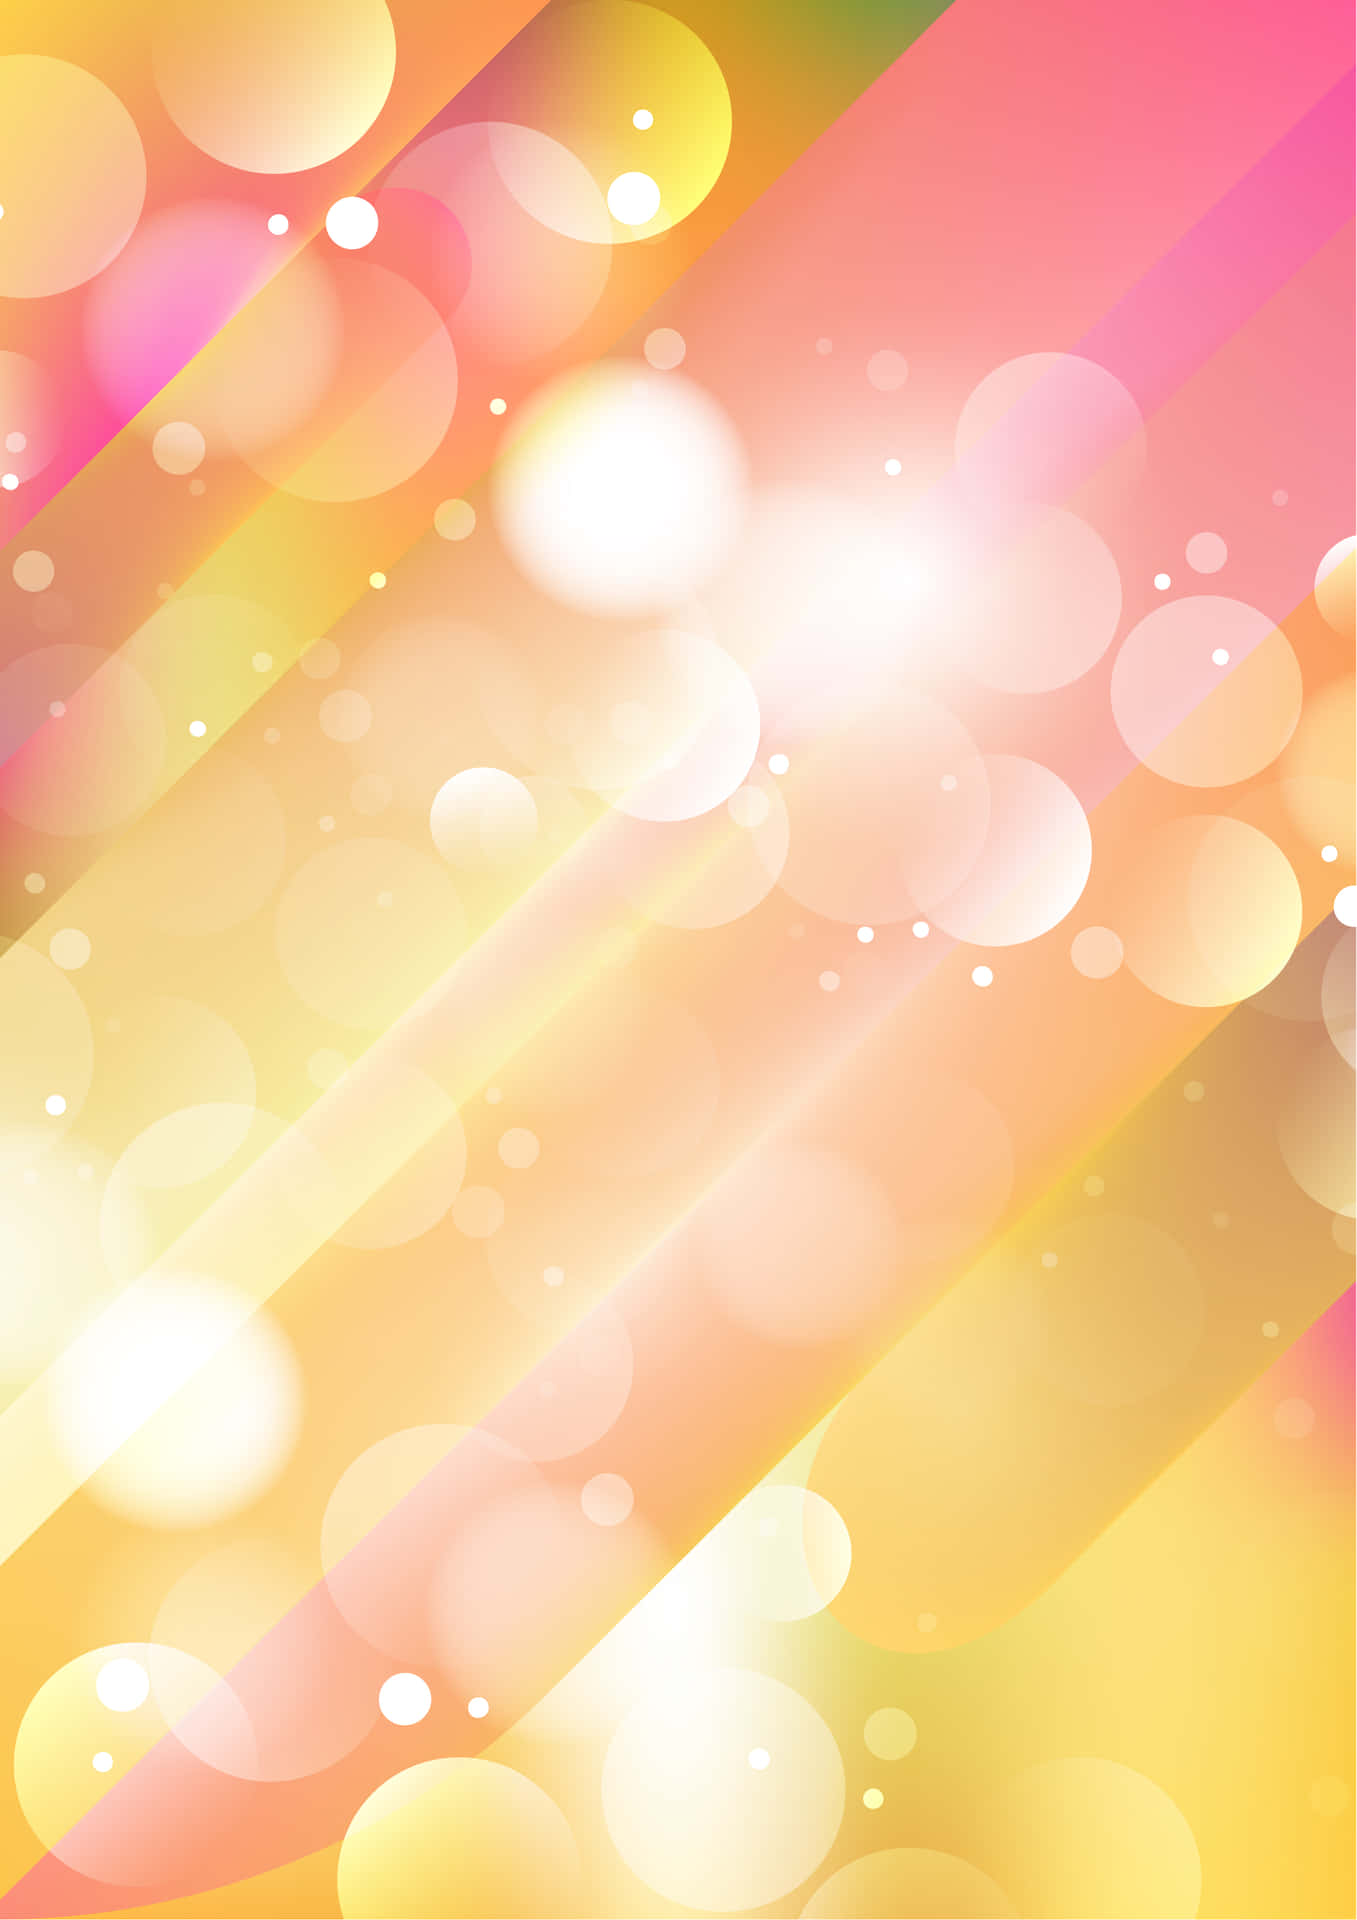 "A bright pink and yellow background for a dynamic, lively look."